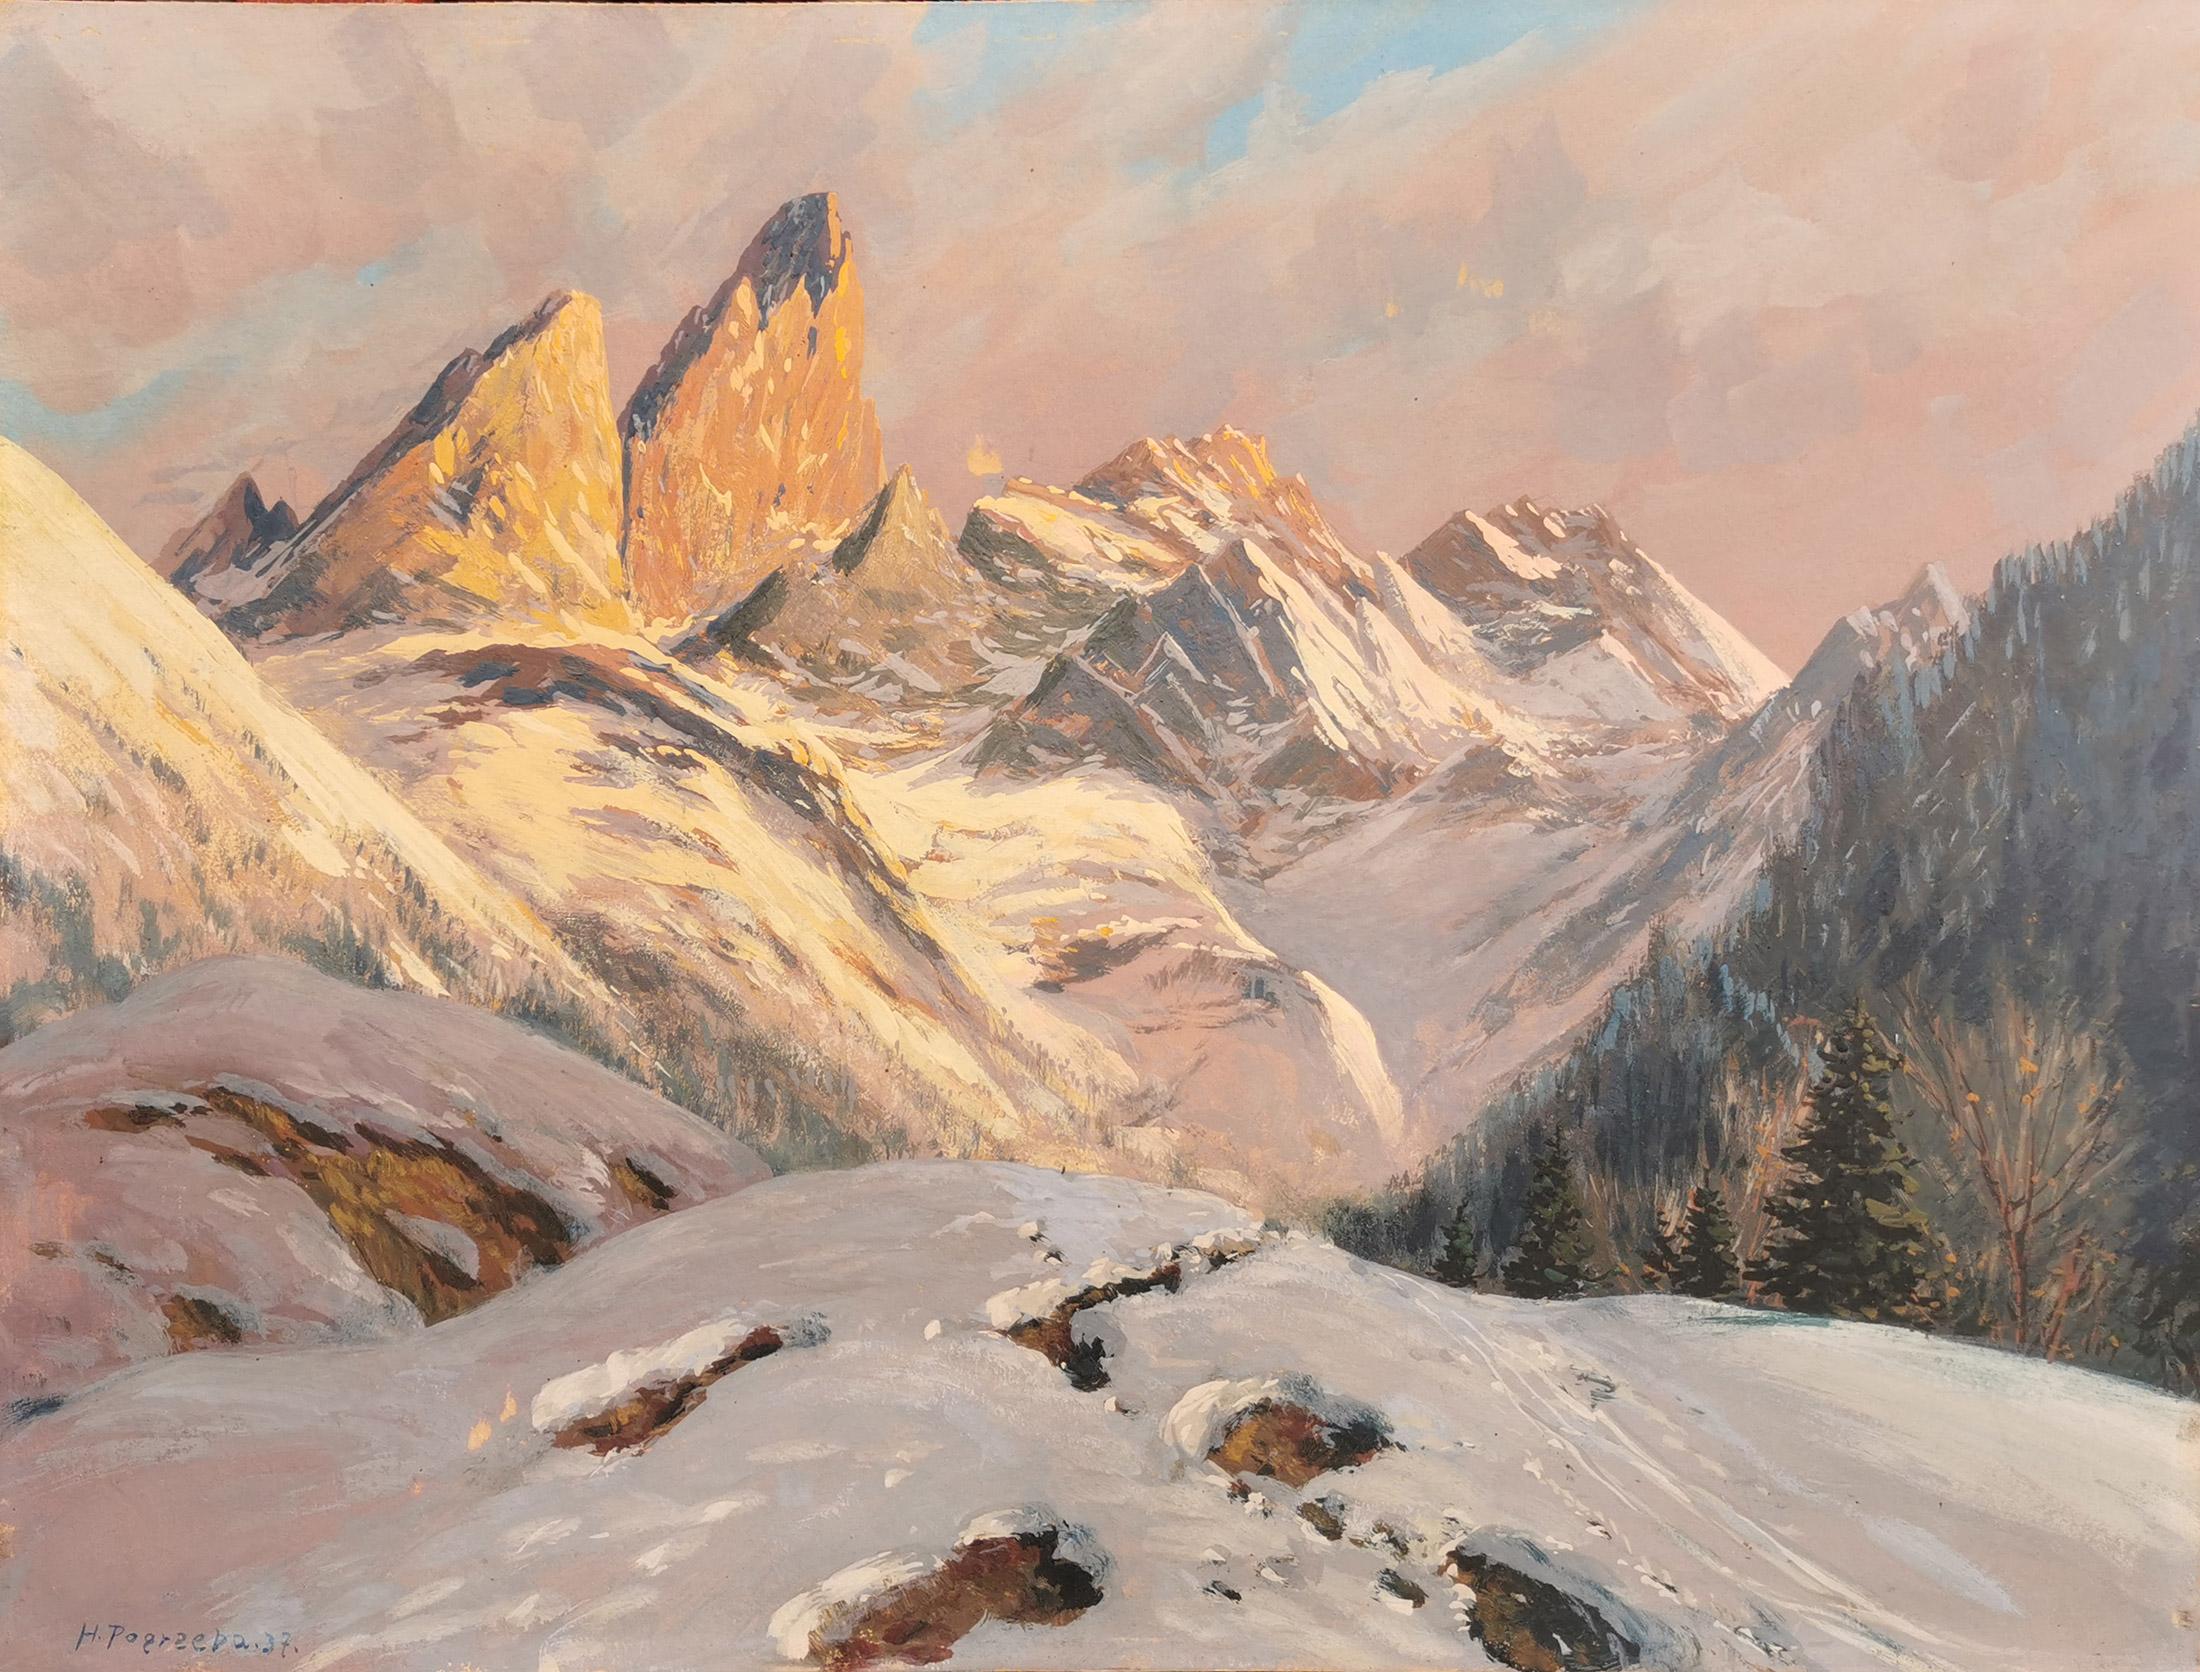 Snowy peaks - Hans Pogrzeba - 1937
COD: QM144
38 cm x 52 cm without frame
46 cm x 60 cm with antique fir frame
oil on cardboard

The Mädelegabel, one of the most famous and highest (2645m) peaks in the Allgäu Alps, on the border between Tyrol